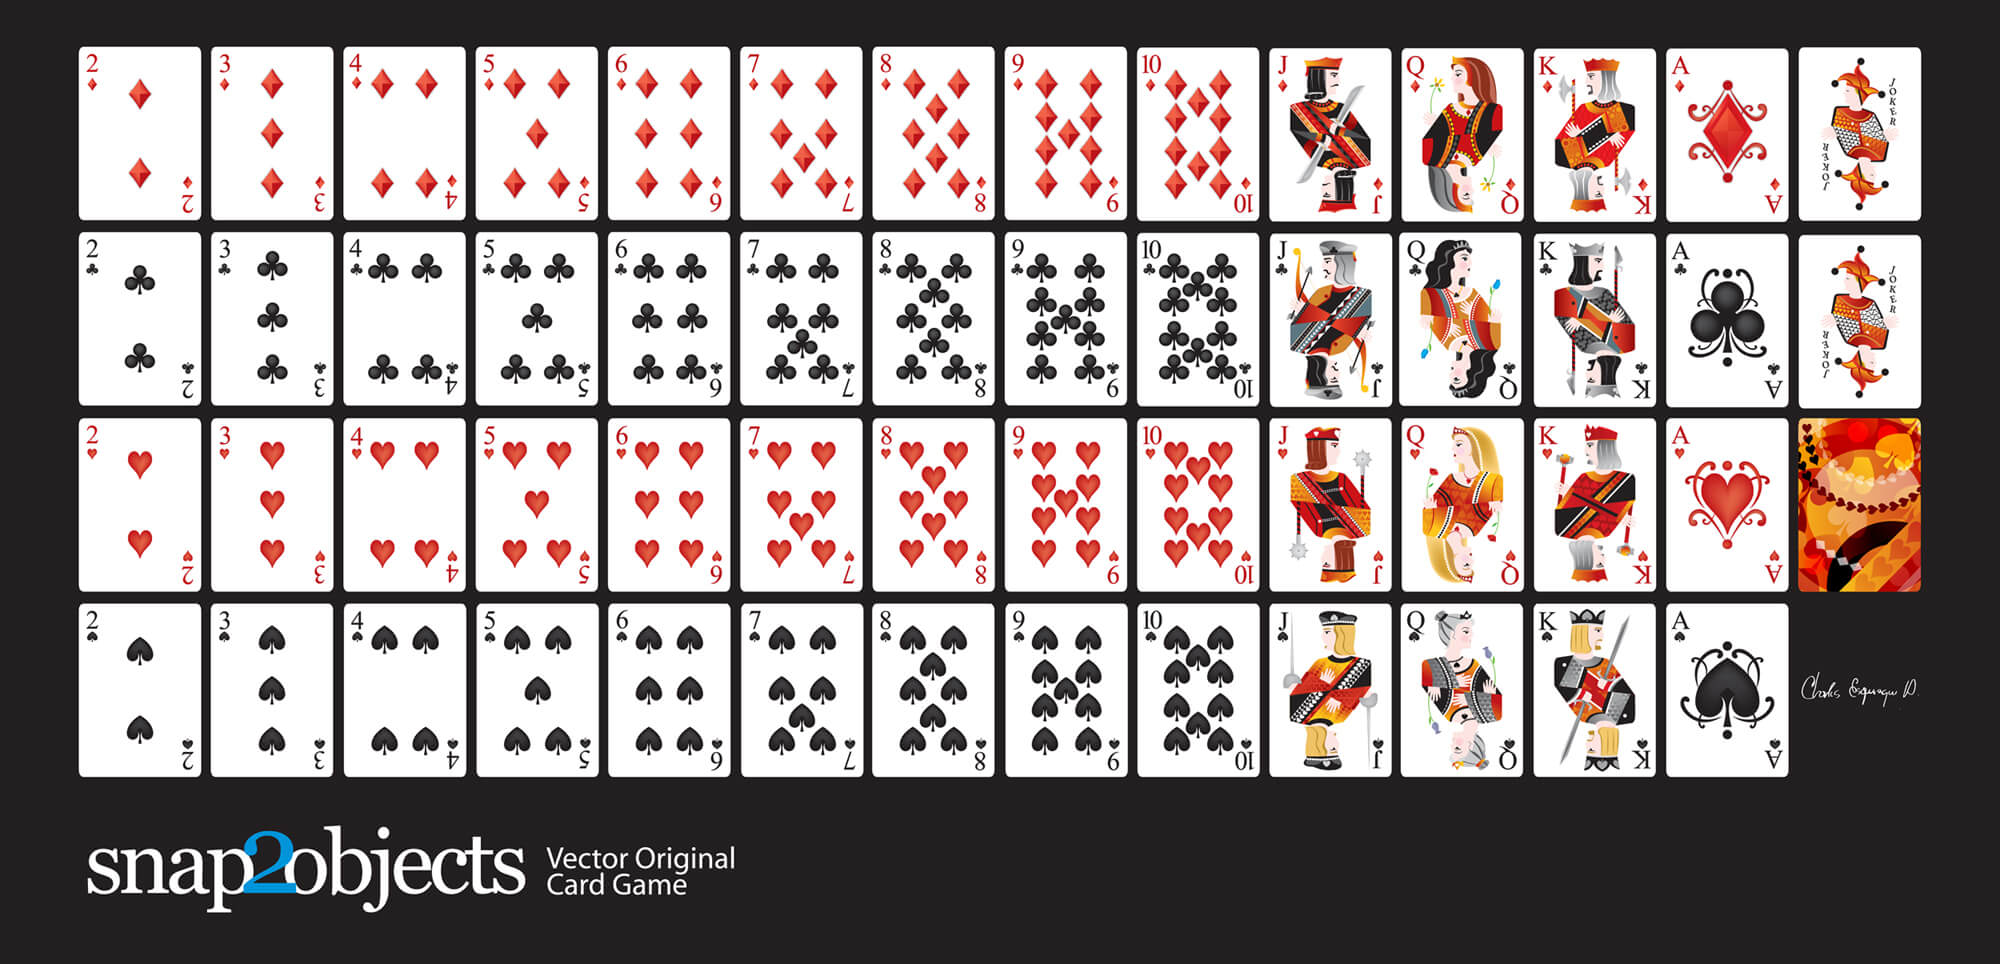 Playing Card Vector Art At Getdrawings | Free For With Regard To Playing Card Design Template